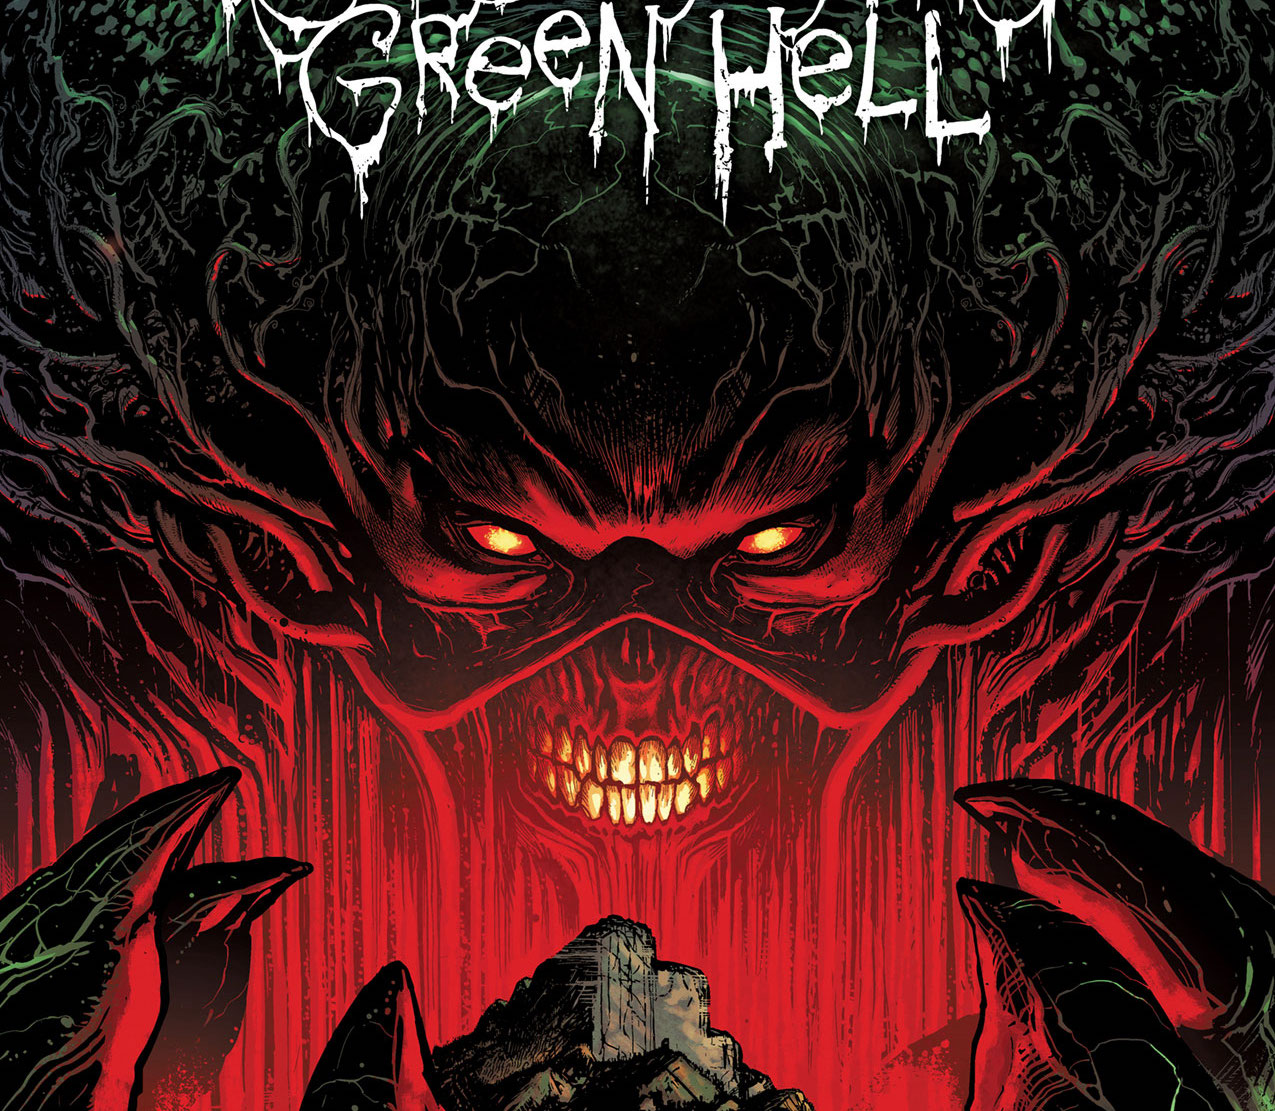 DC First Look: Swamp Thing Green Hell #1